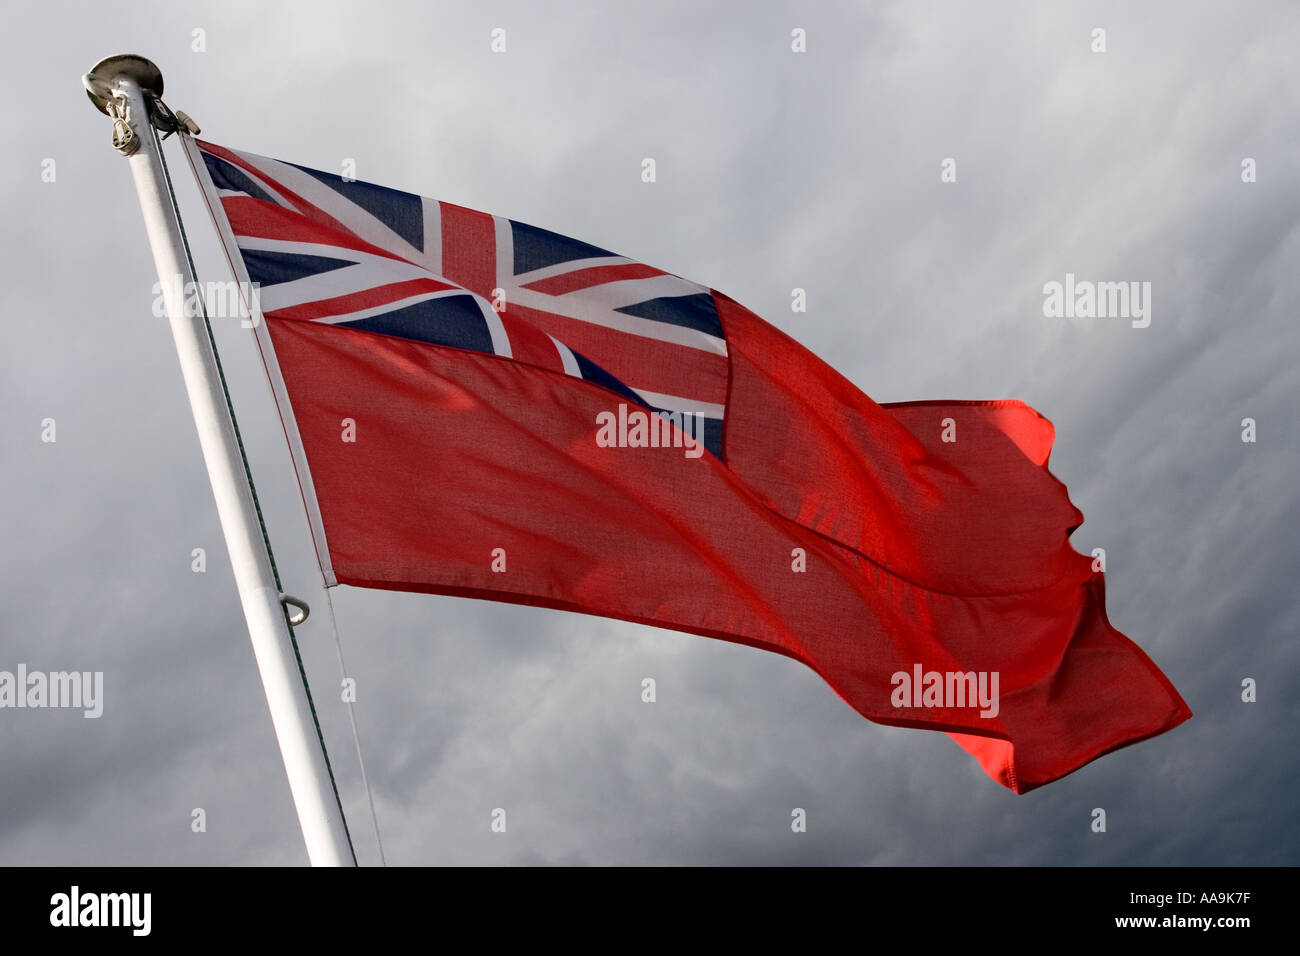 Red Ensign fliegt am Lake Windermere Stockfoto